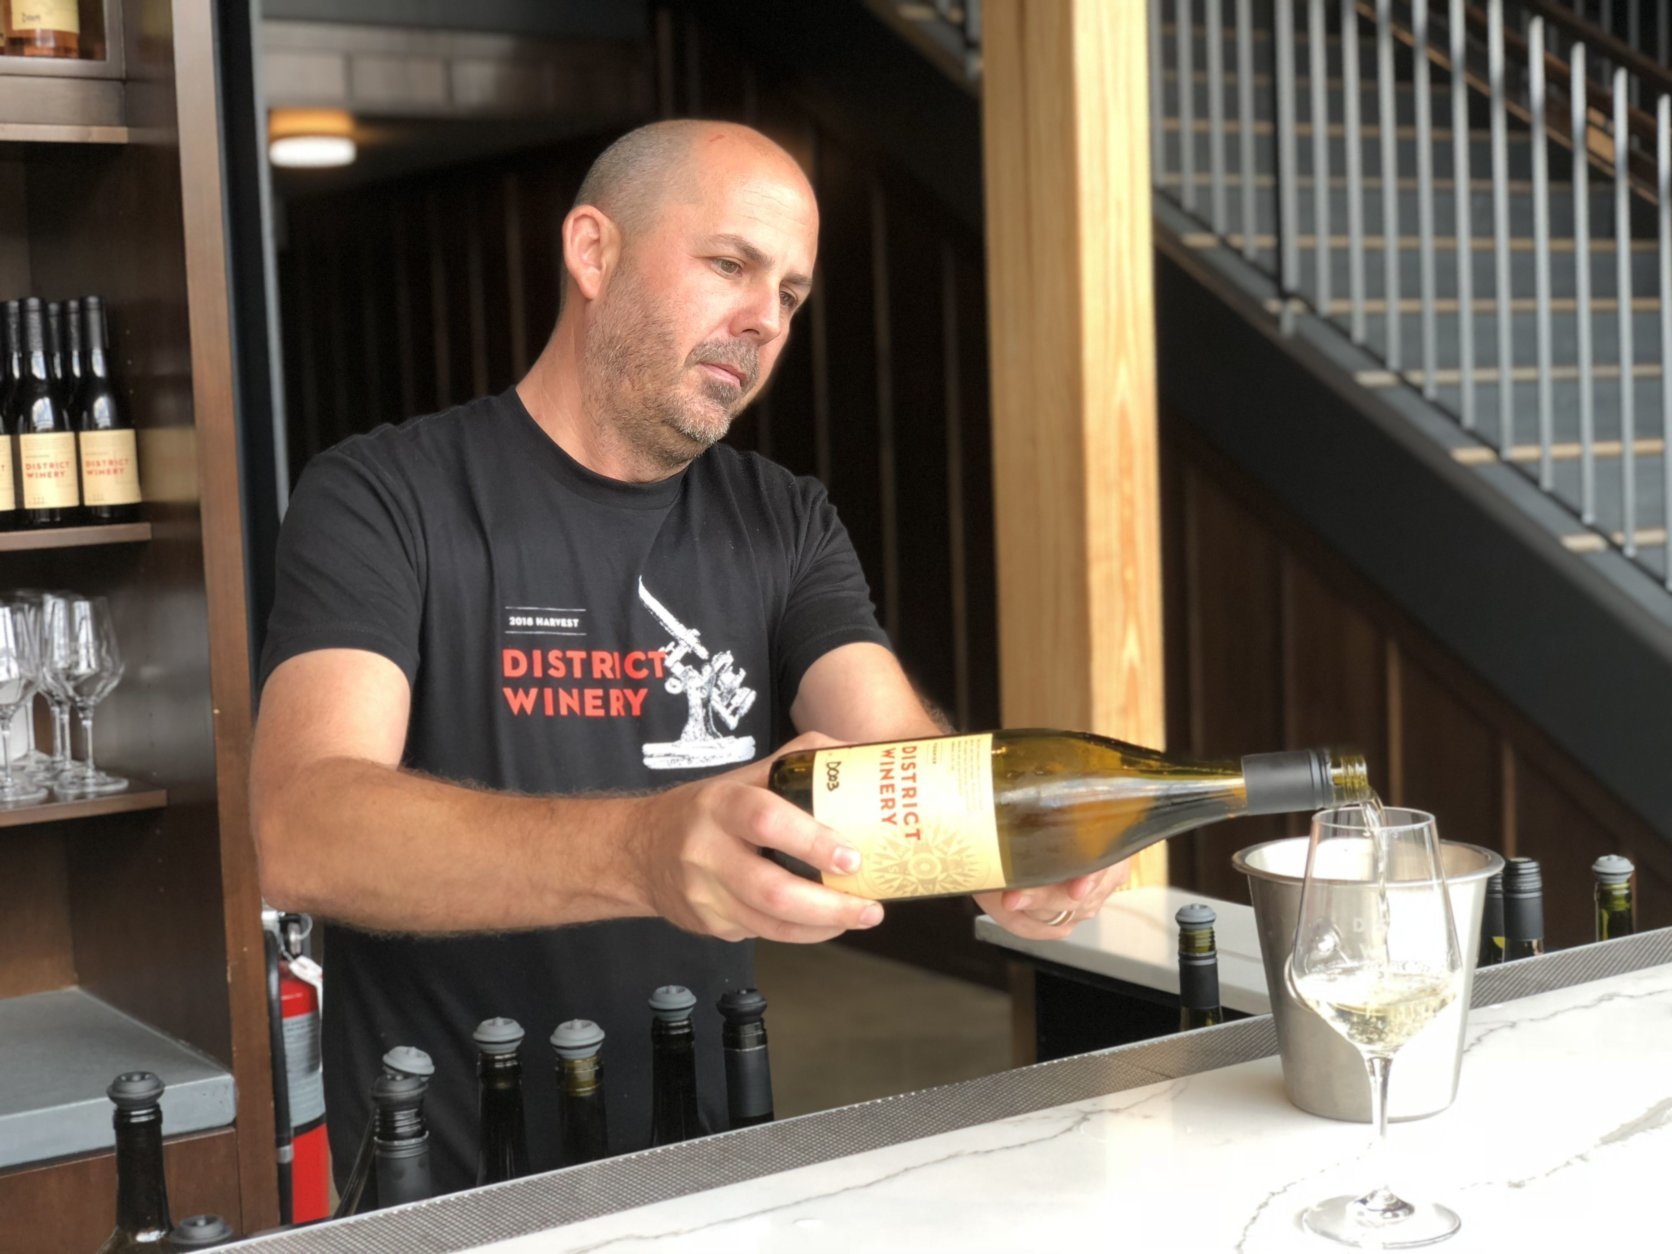 Conor McCormack is the head winemaker at District Winery in Southeast D.C. The urban winery opened in August 2017. (WTOP/Rachel Nania) 